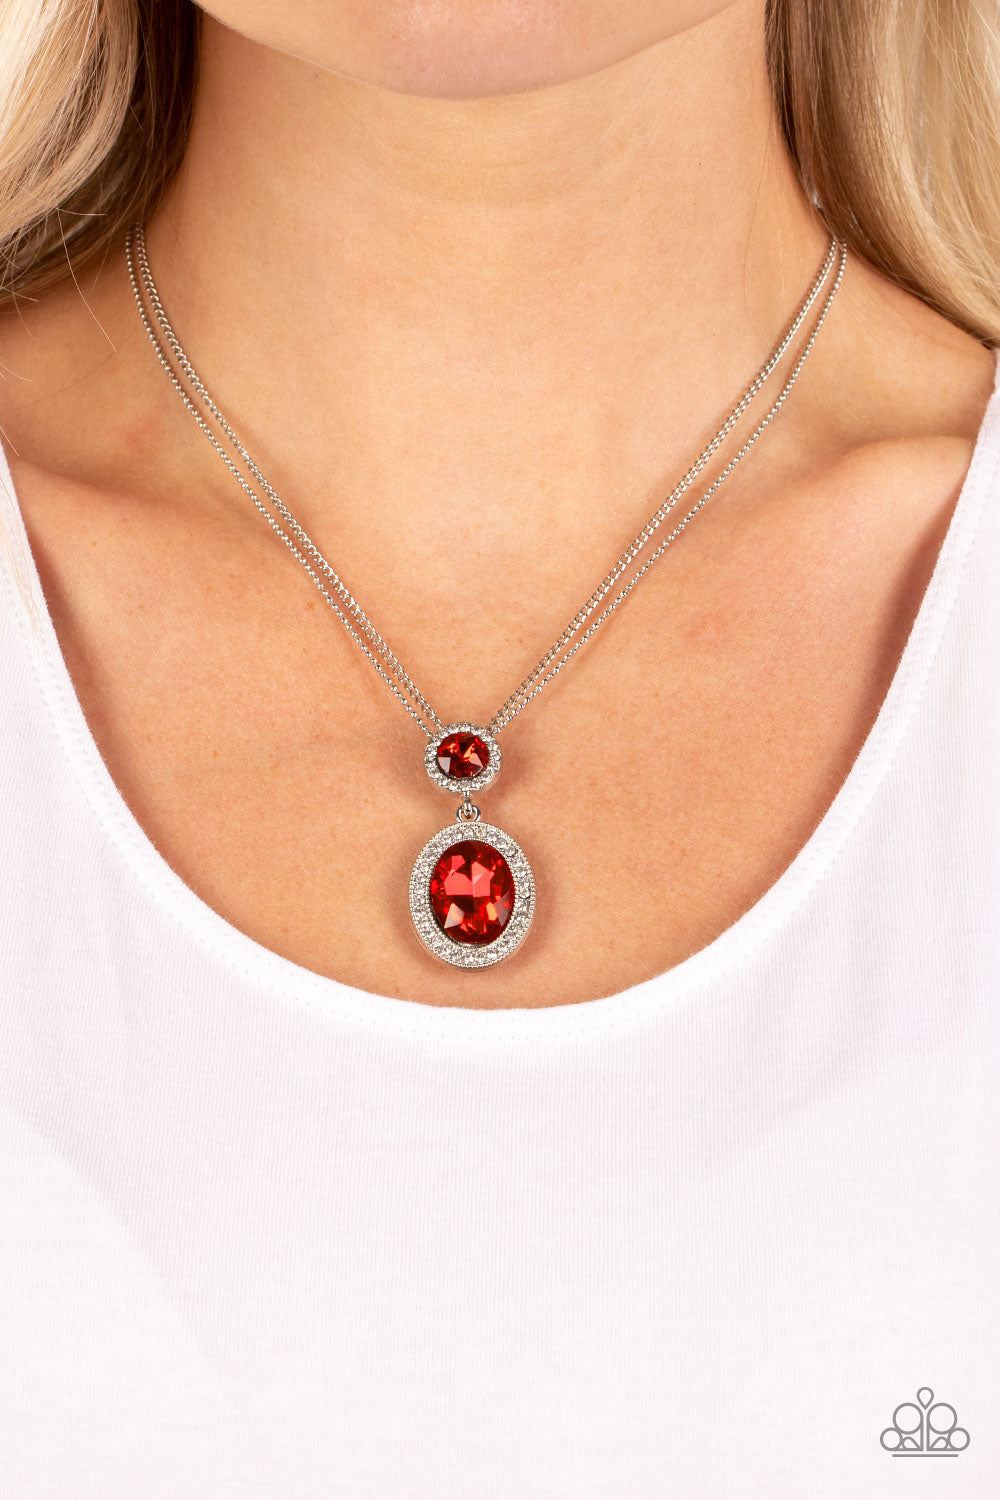 Castle Diamonds Necklace (Brown, Silver, Red)